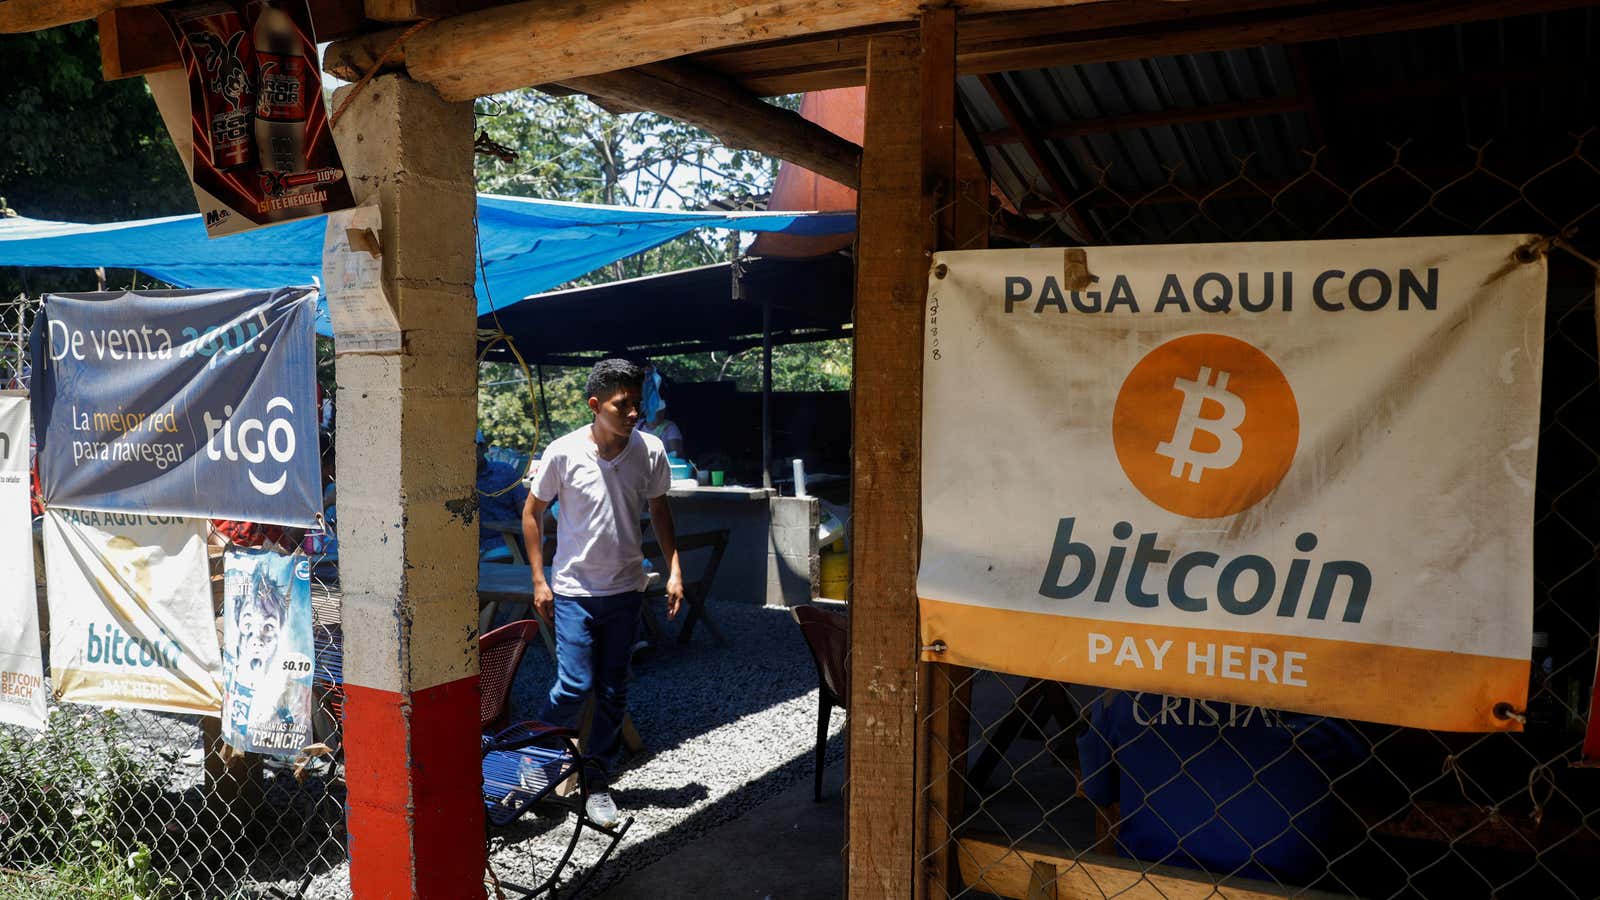 A banner hanging on the exterior wall of a restaurant in El Salvador reads “Pay here with Bitcoin.”